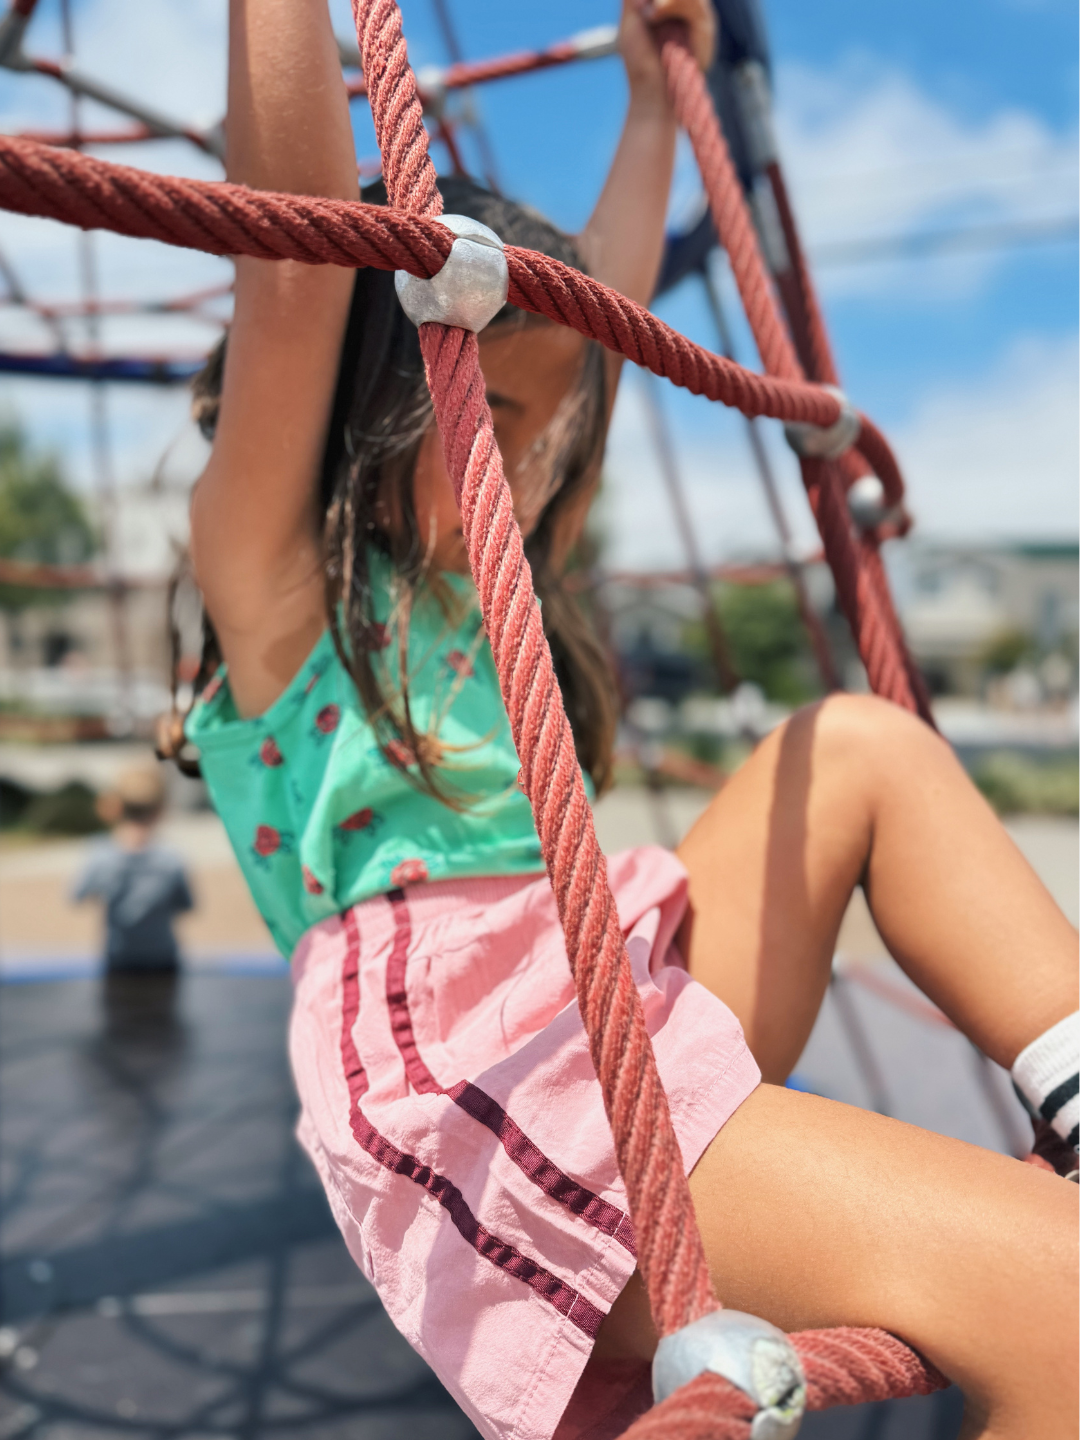 Green | Girl wearing the kids' roses tank top with pink shorts with maroon stripes down the side. She is climbing on a red rope play structure.